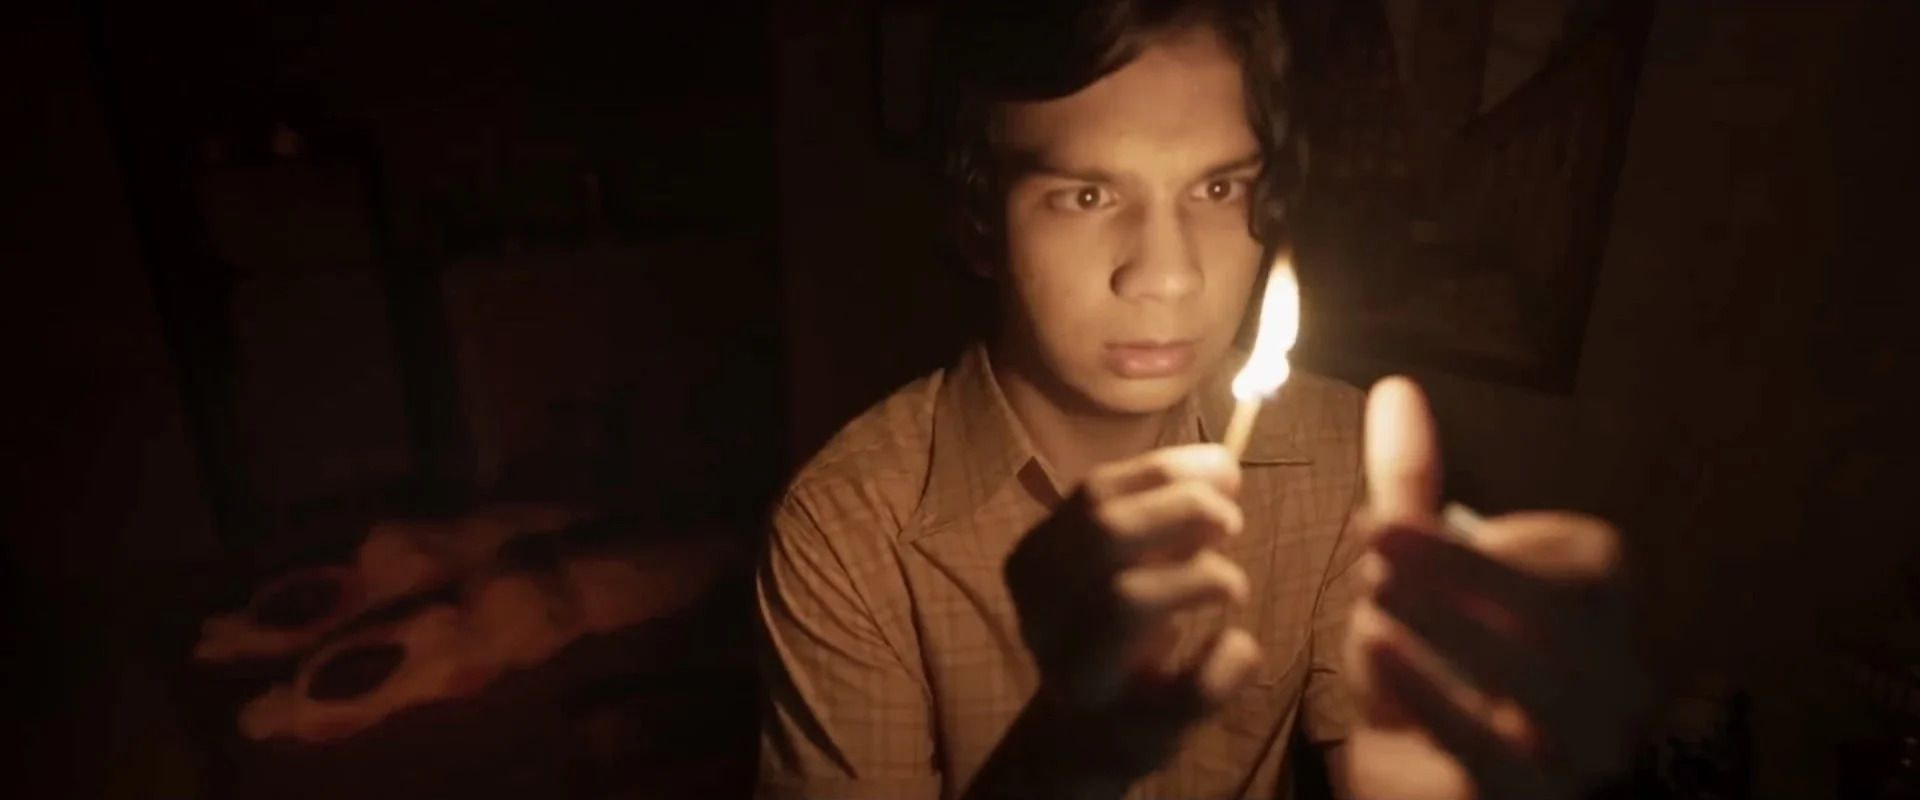 A young man holds a candle in a dark room with two bodies wrapped in blankets in the background.